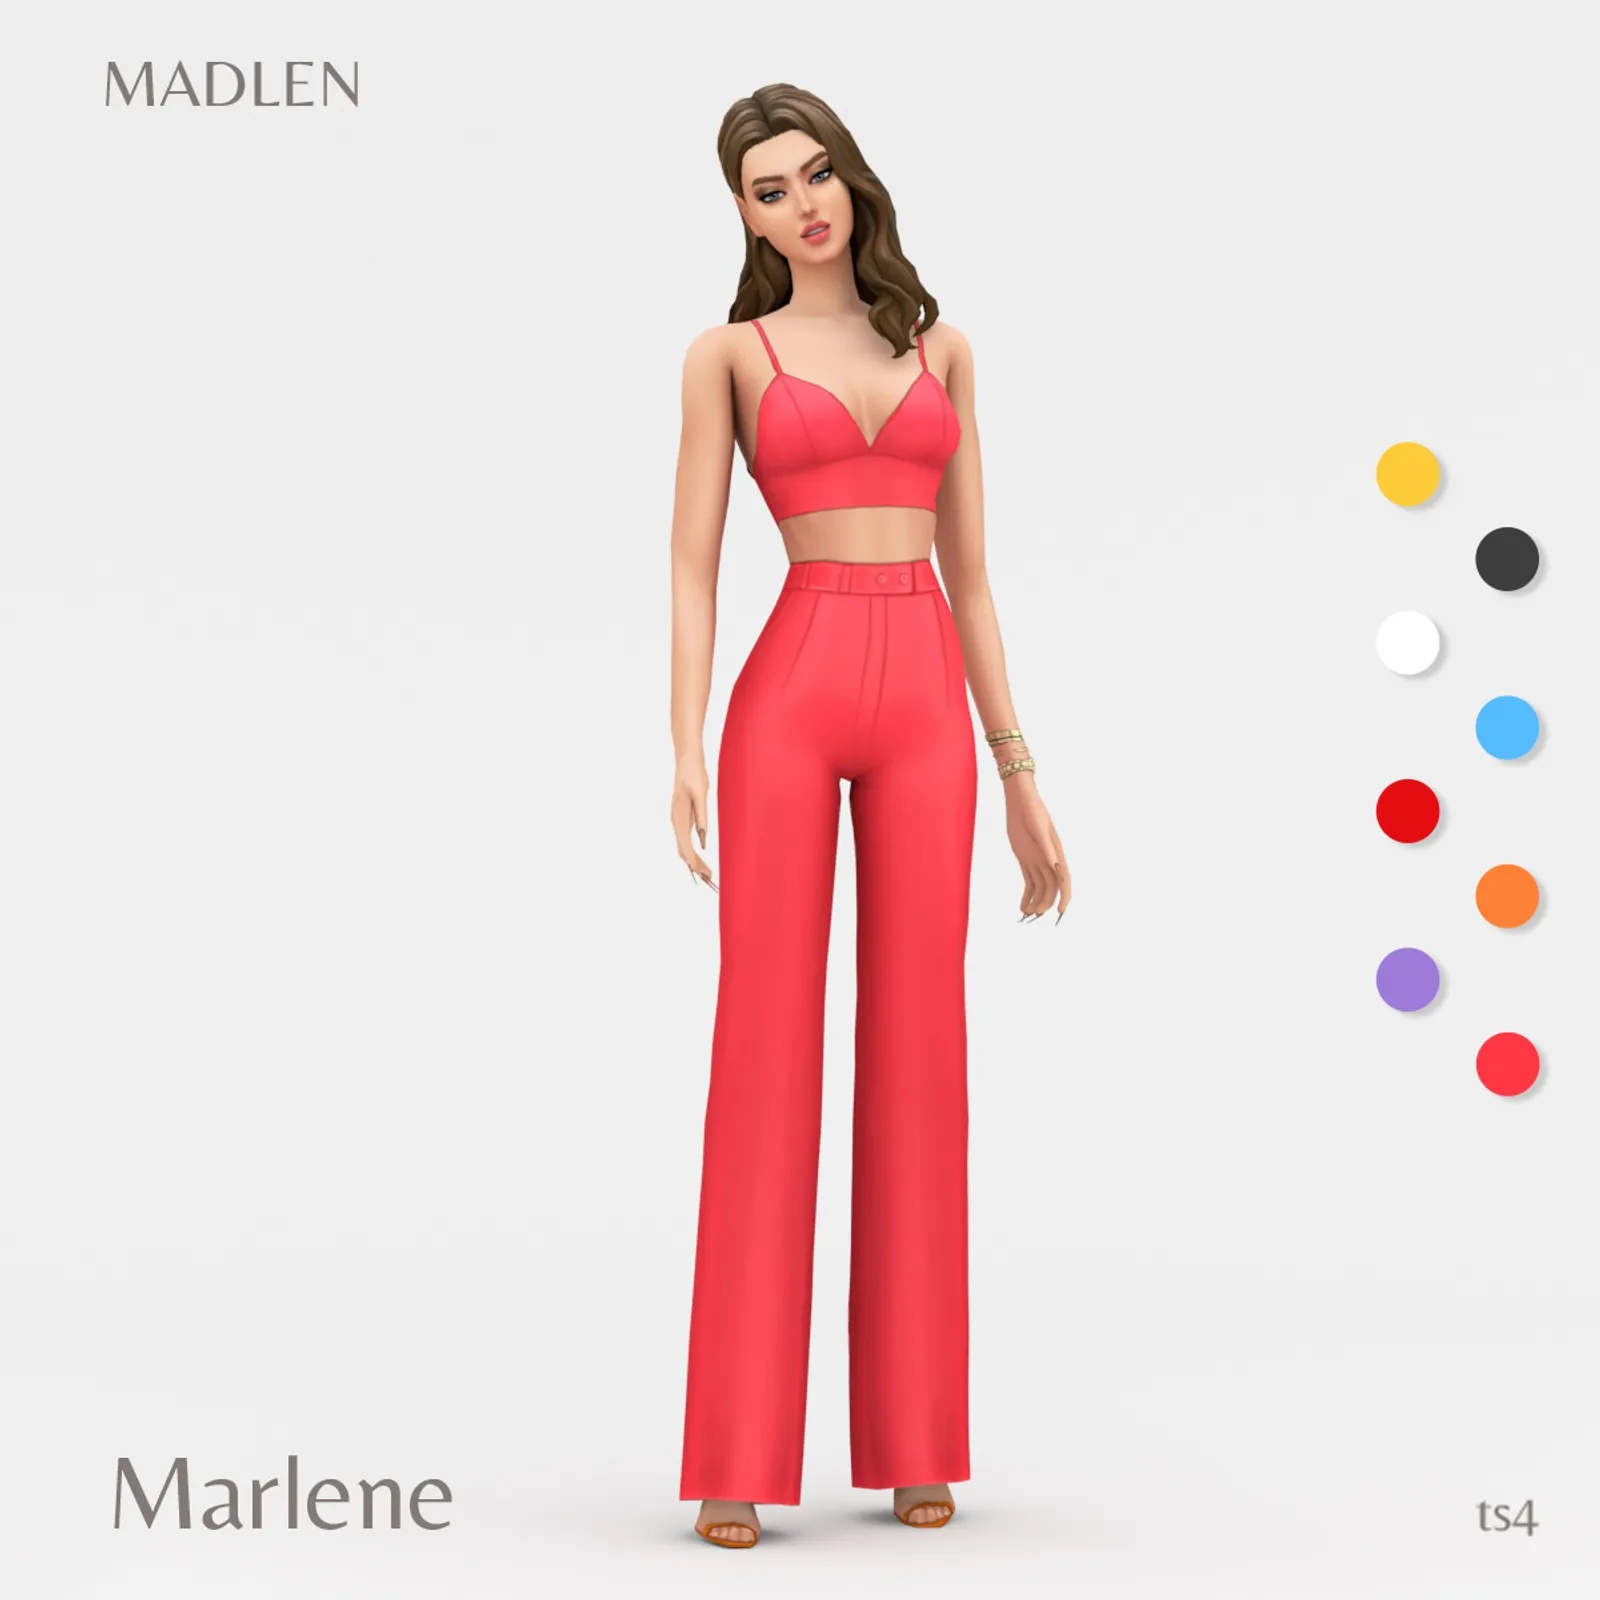 Marlene Outfit